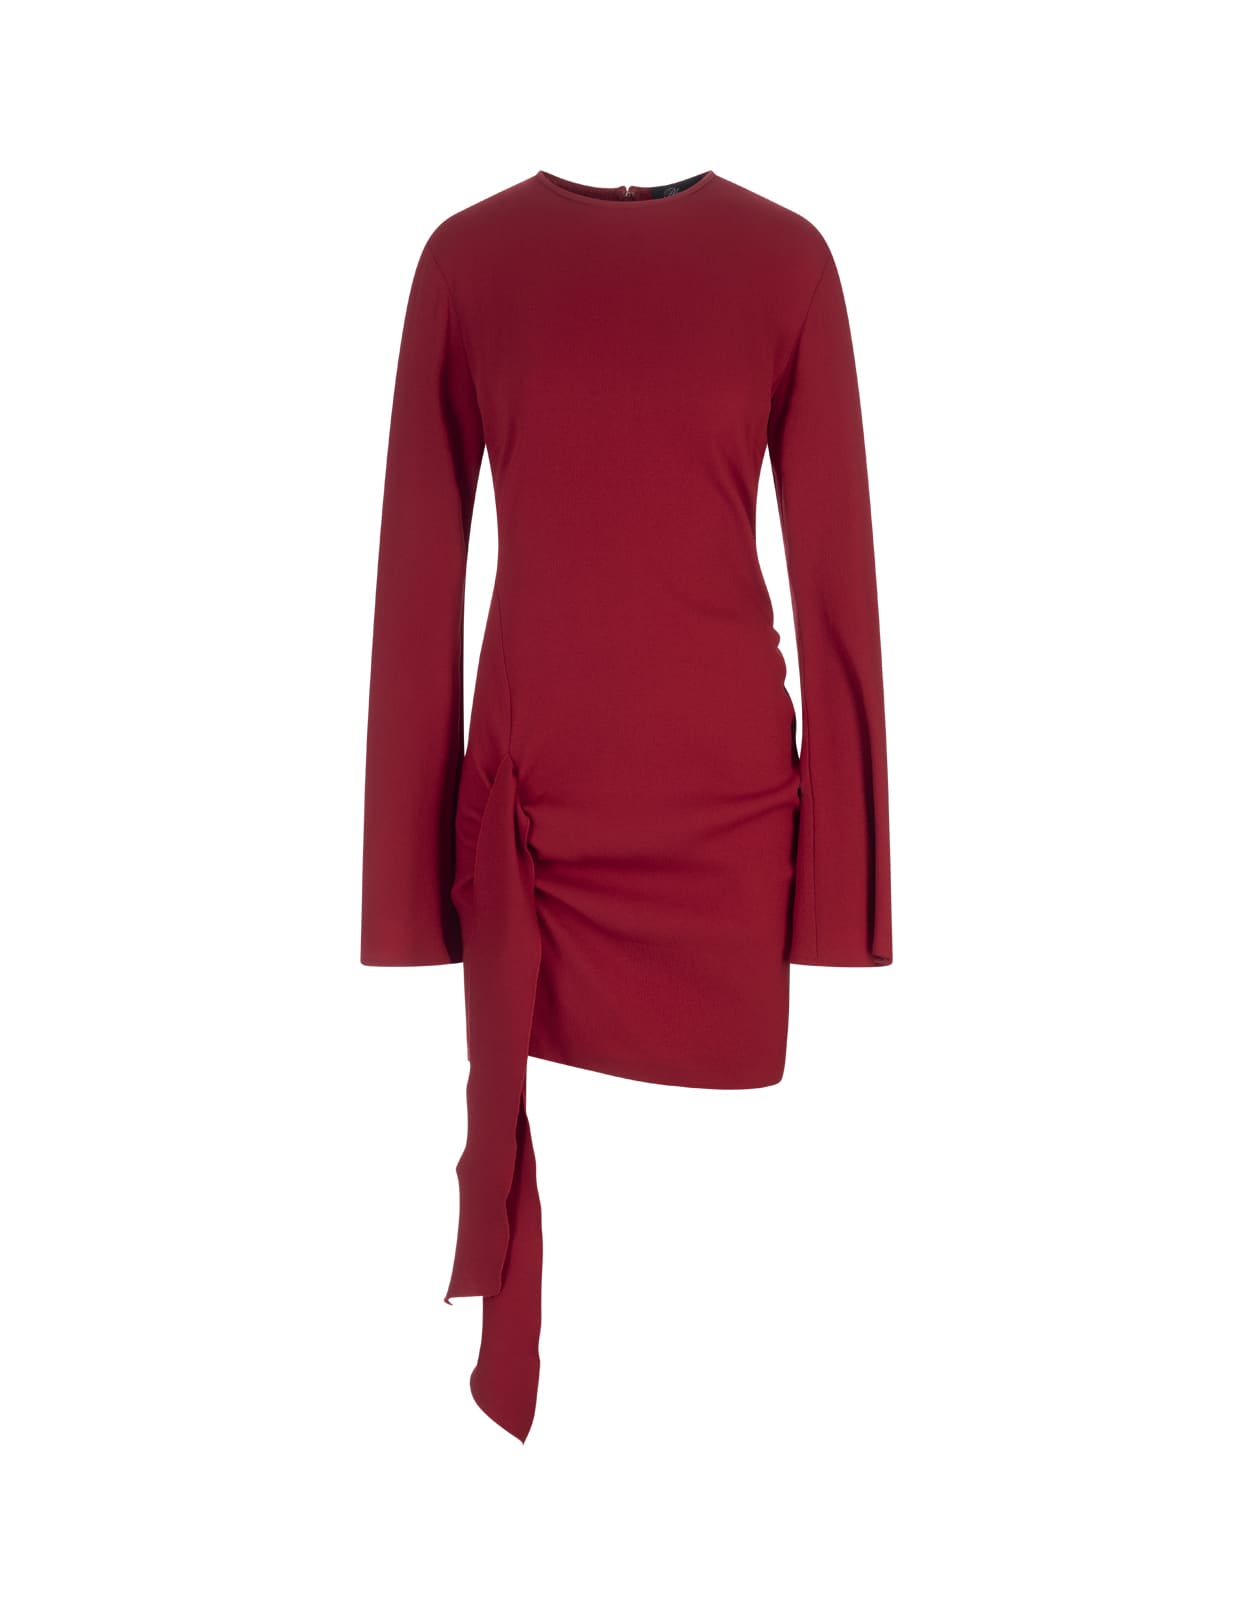 BLUMARINE RED SHORT DRESS WITH LONG SLEEVES AND BOW DETAIL